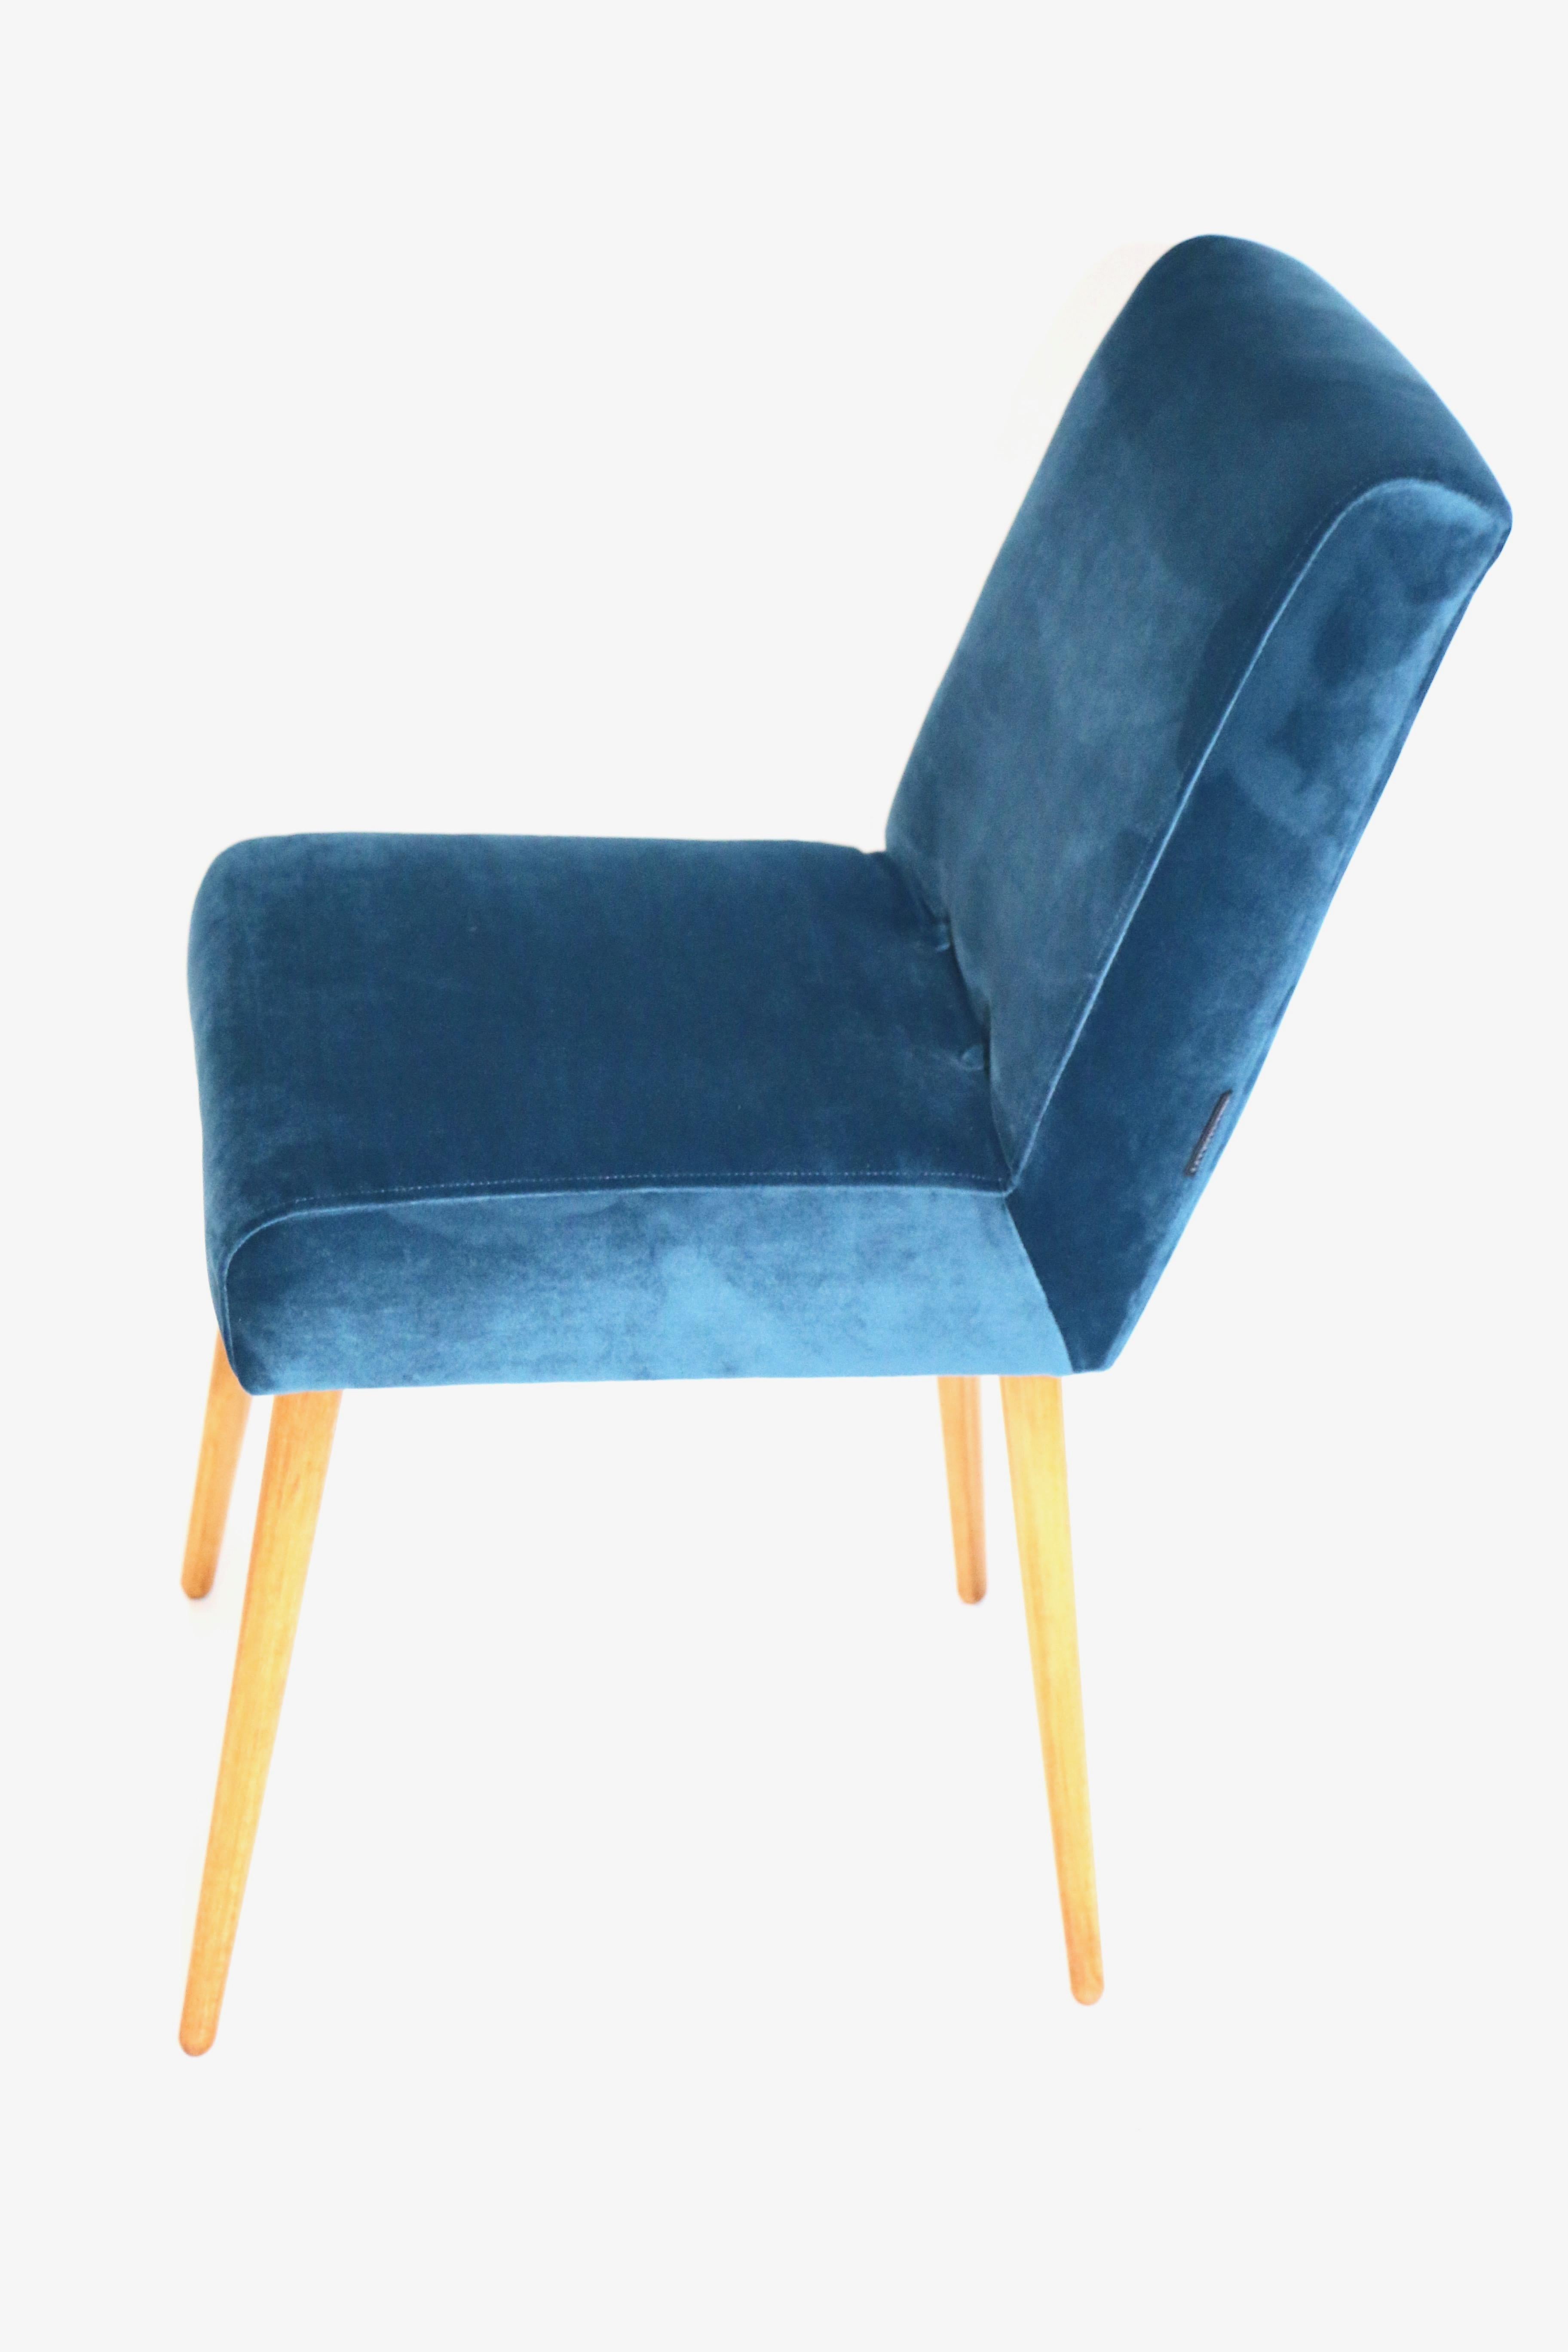 Set of Two Blue Marine Chairs in Velvet For Sale 6